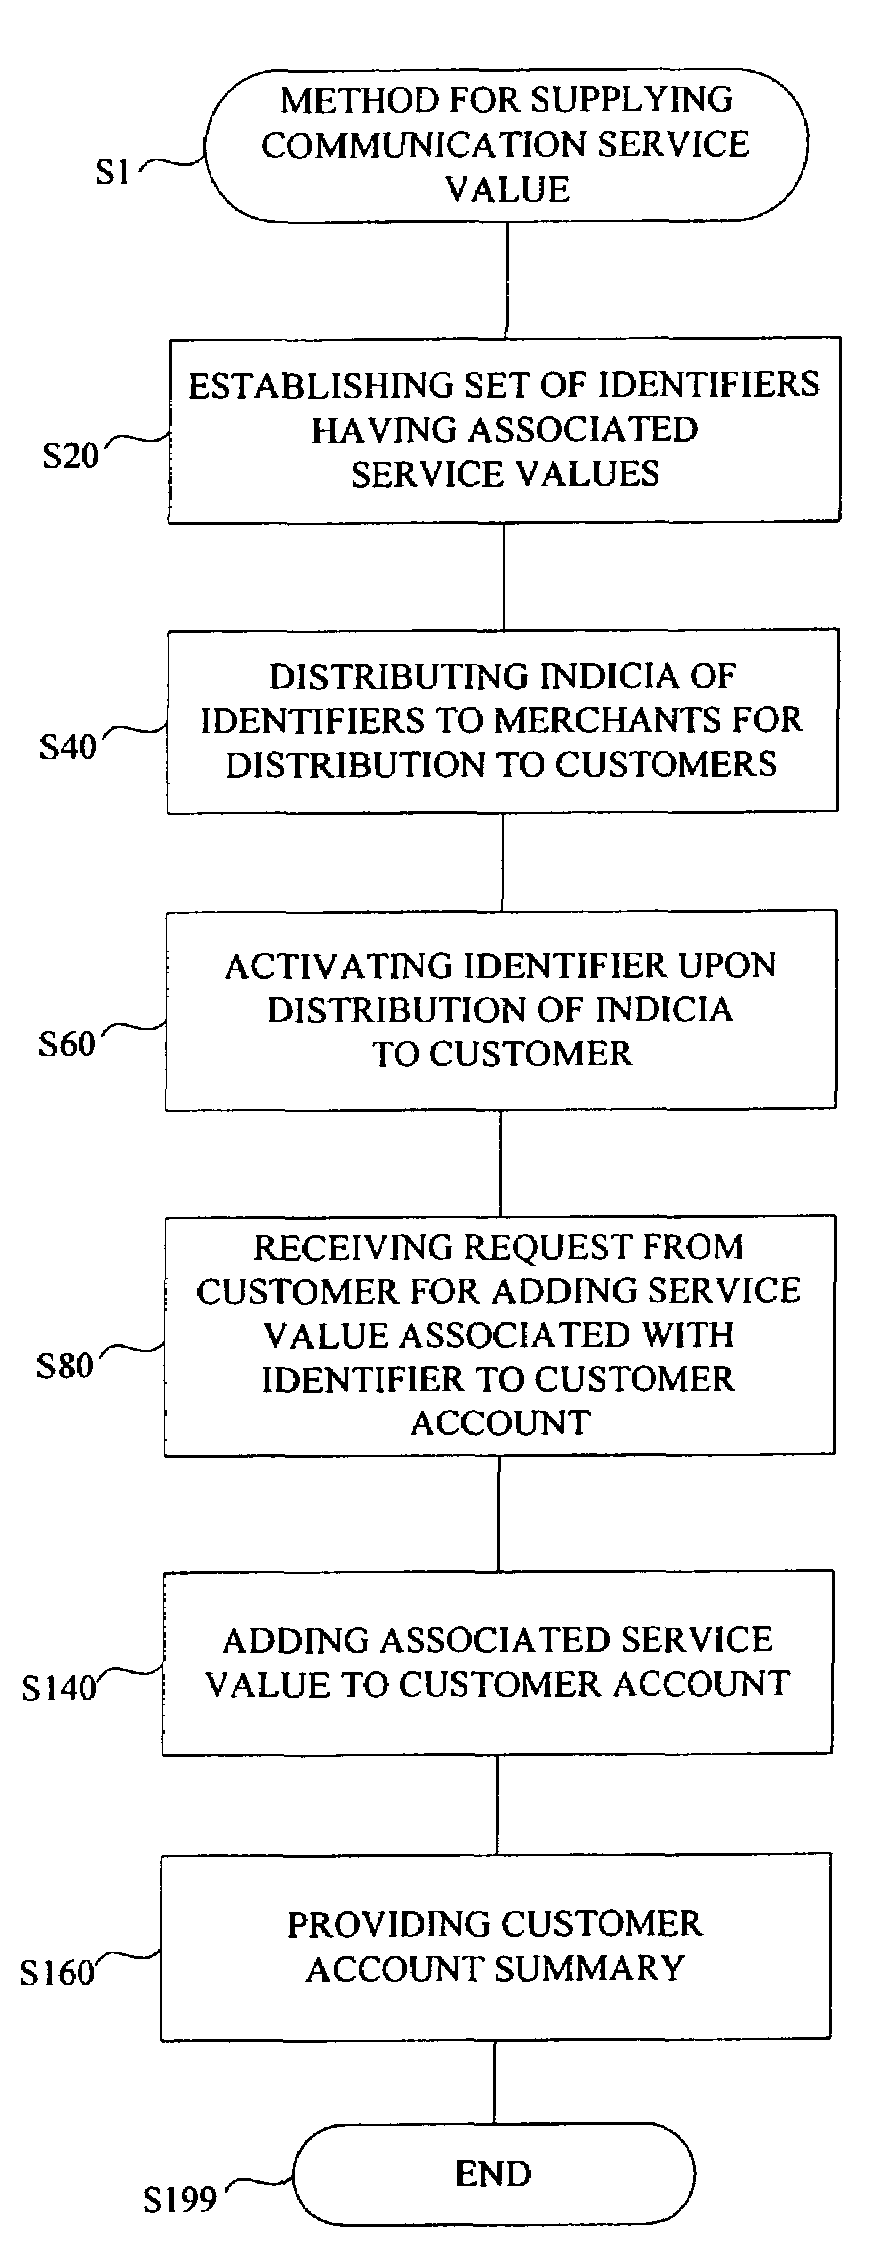 System and method for securing communication service